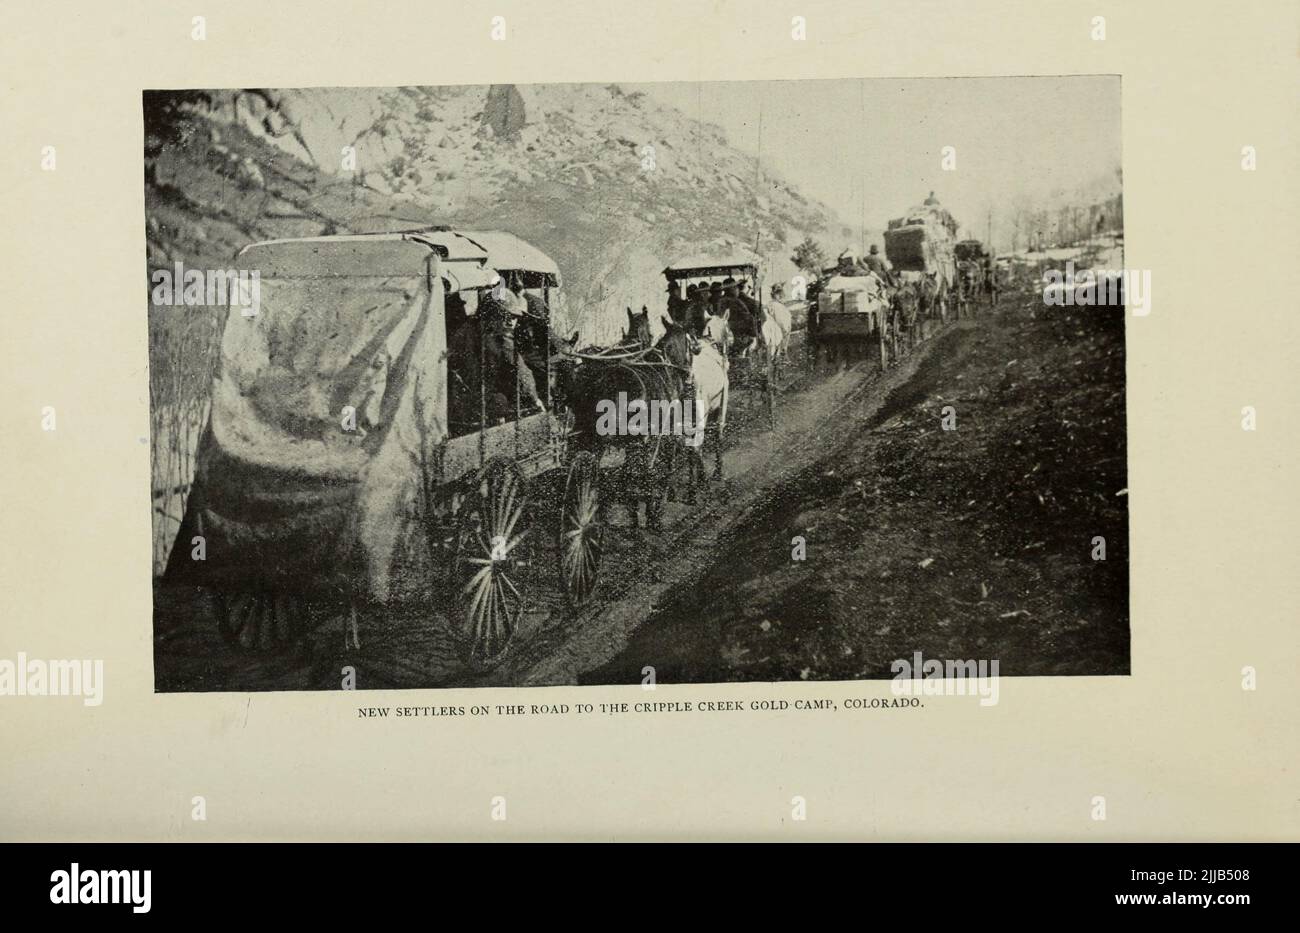 New Settlers on the Road to the Cripple Creek Camp, Colorado from the article ' COLORADO'S NEW GOLD-CAMPS ' By Prof. Arthur Lakes from The Engineering Magazine DEVOTED TO INDUSTRIAL PROGRESS Volume VII April to September, 1894 NEW YORK The Engineering Magazine Co Stock Photo